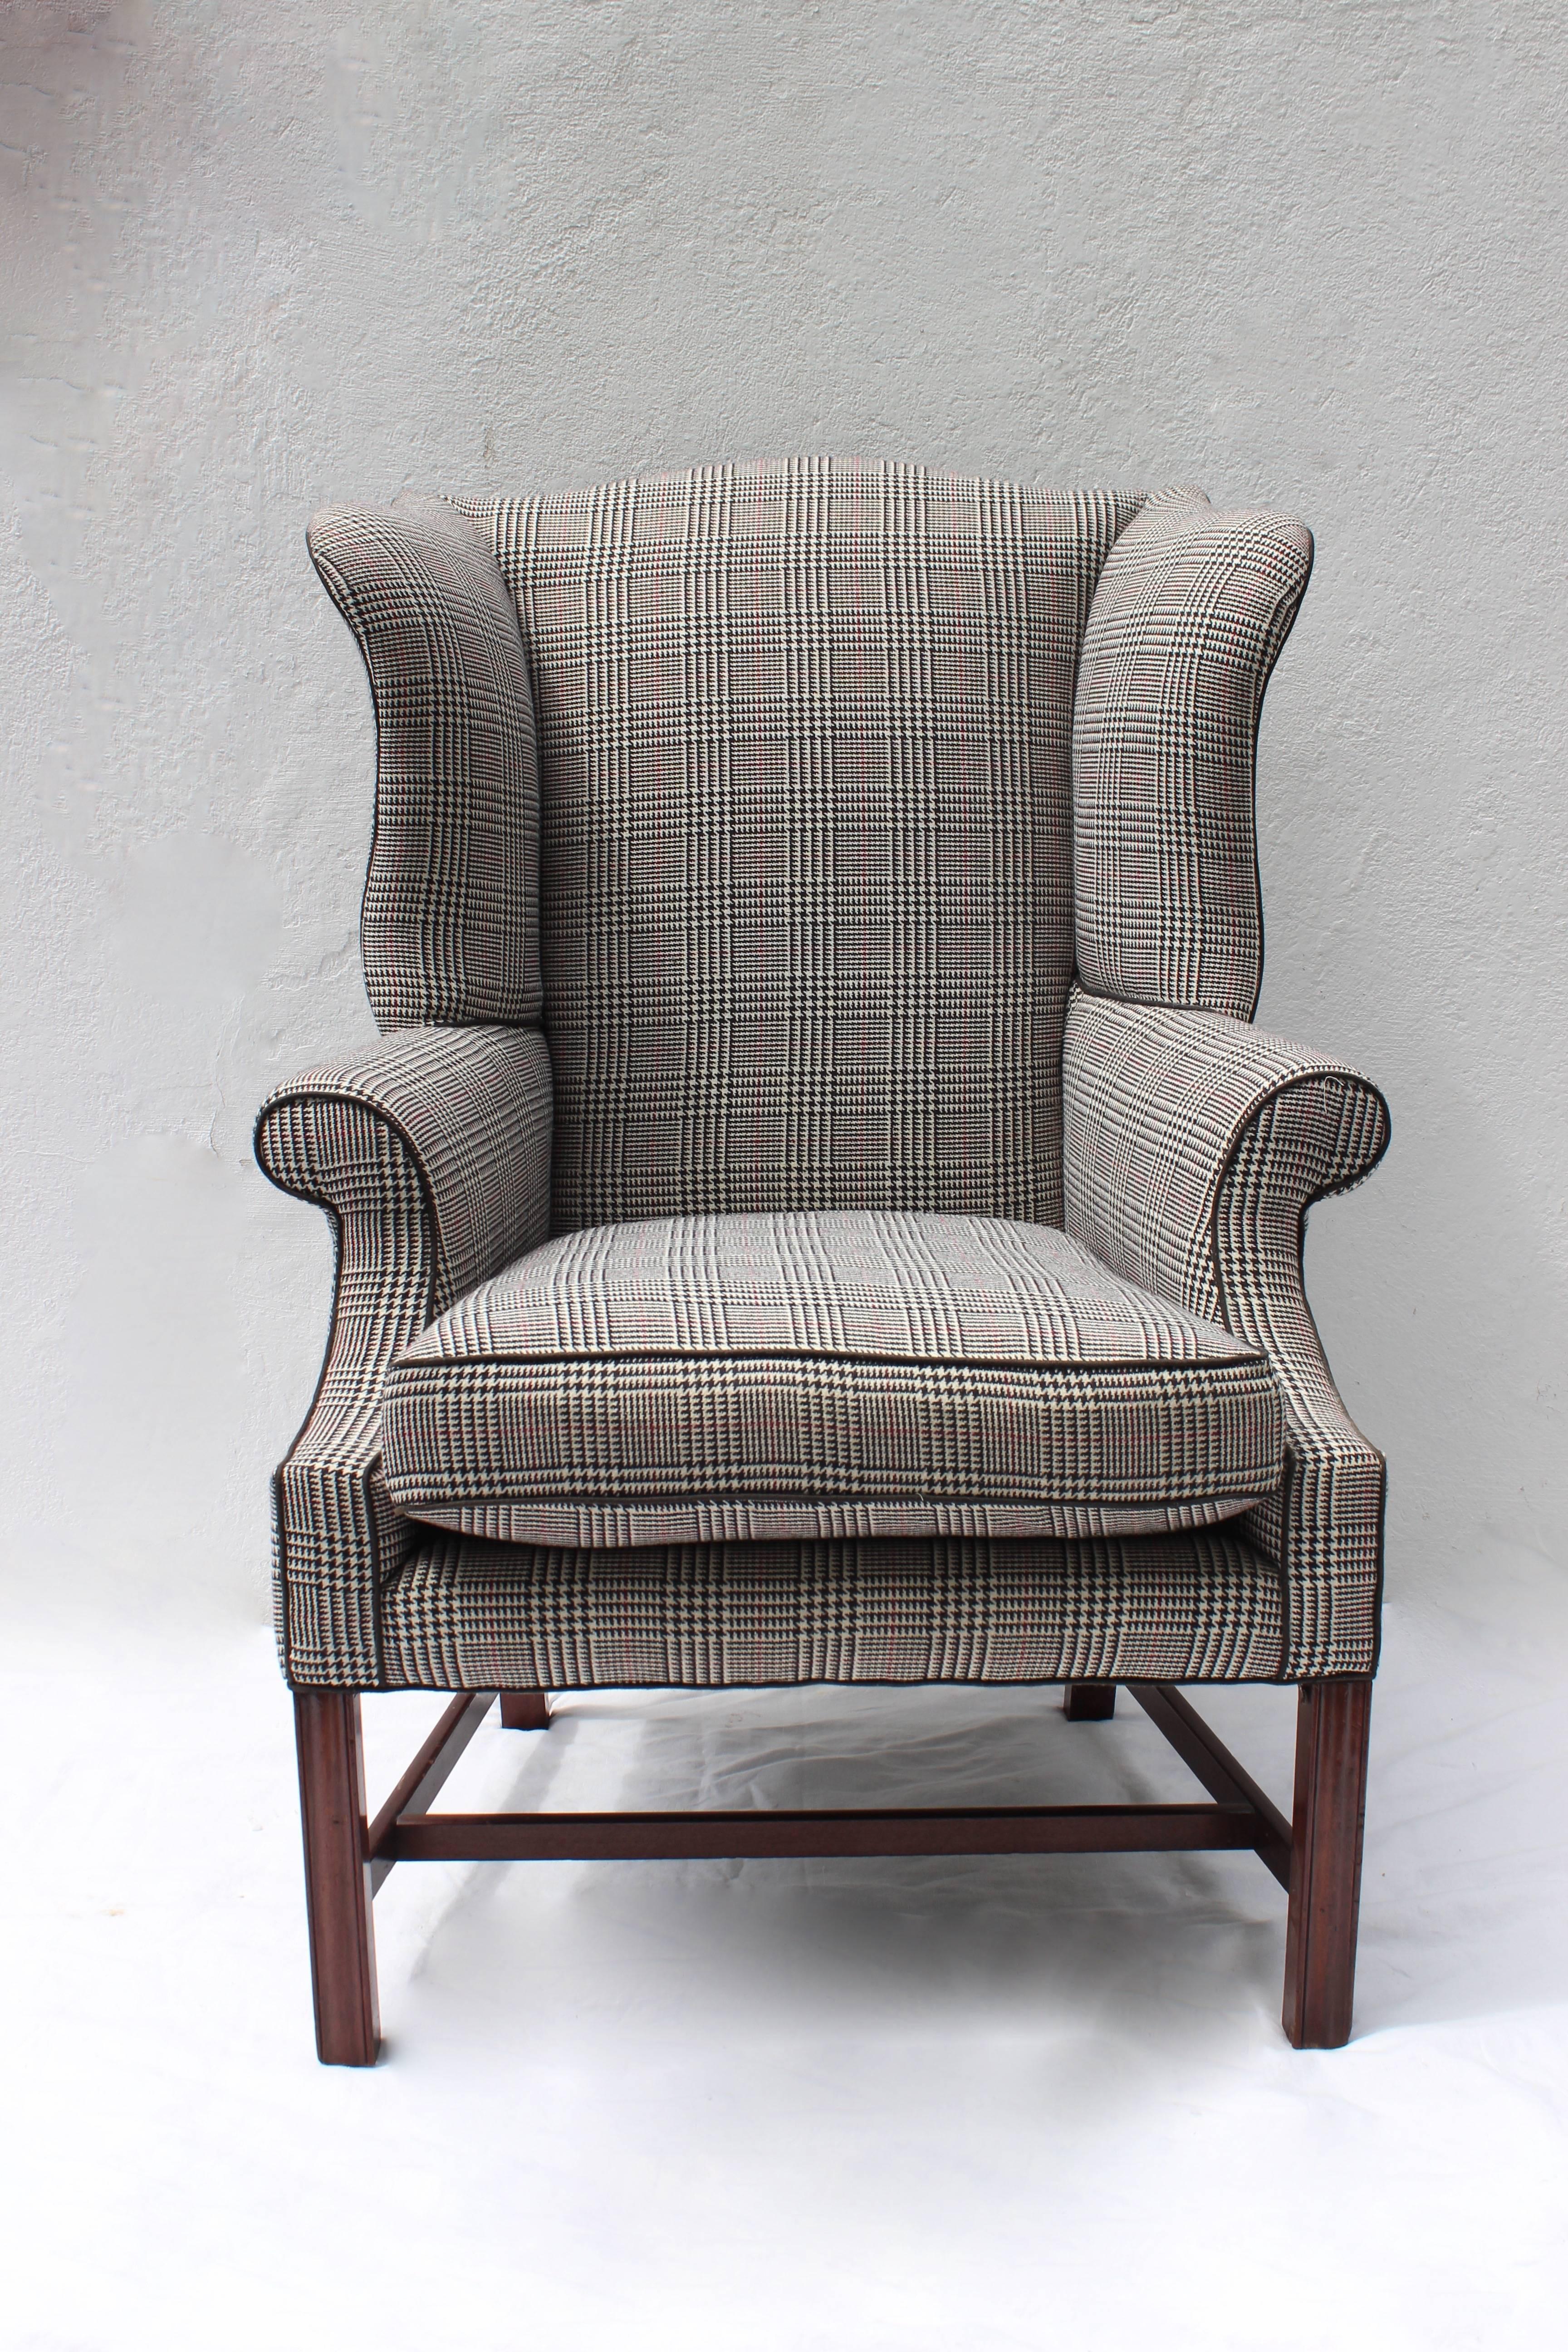 Large late 18th century American Chippendale wingback chair. 

Newly upholstered in wool check.